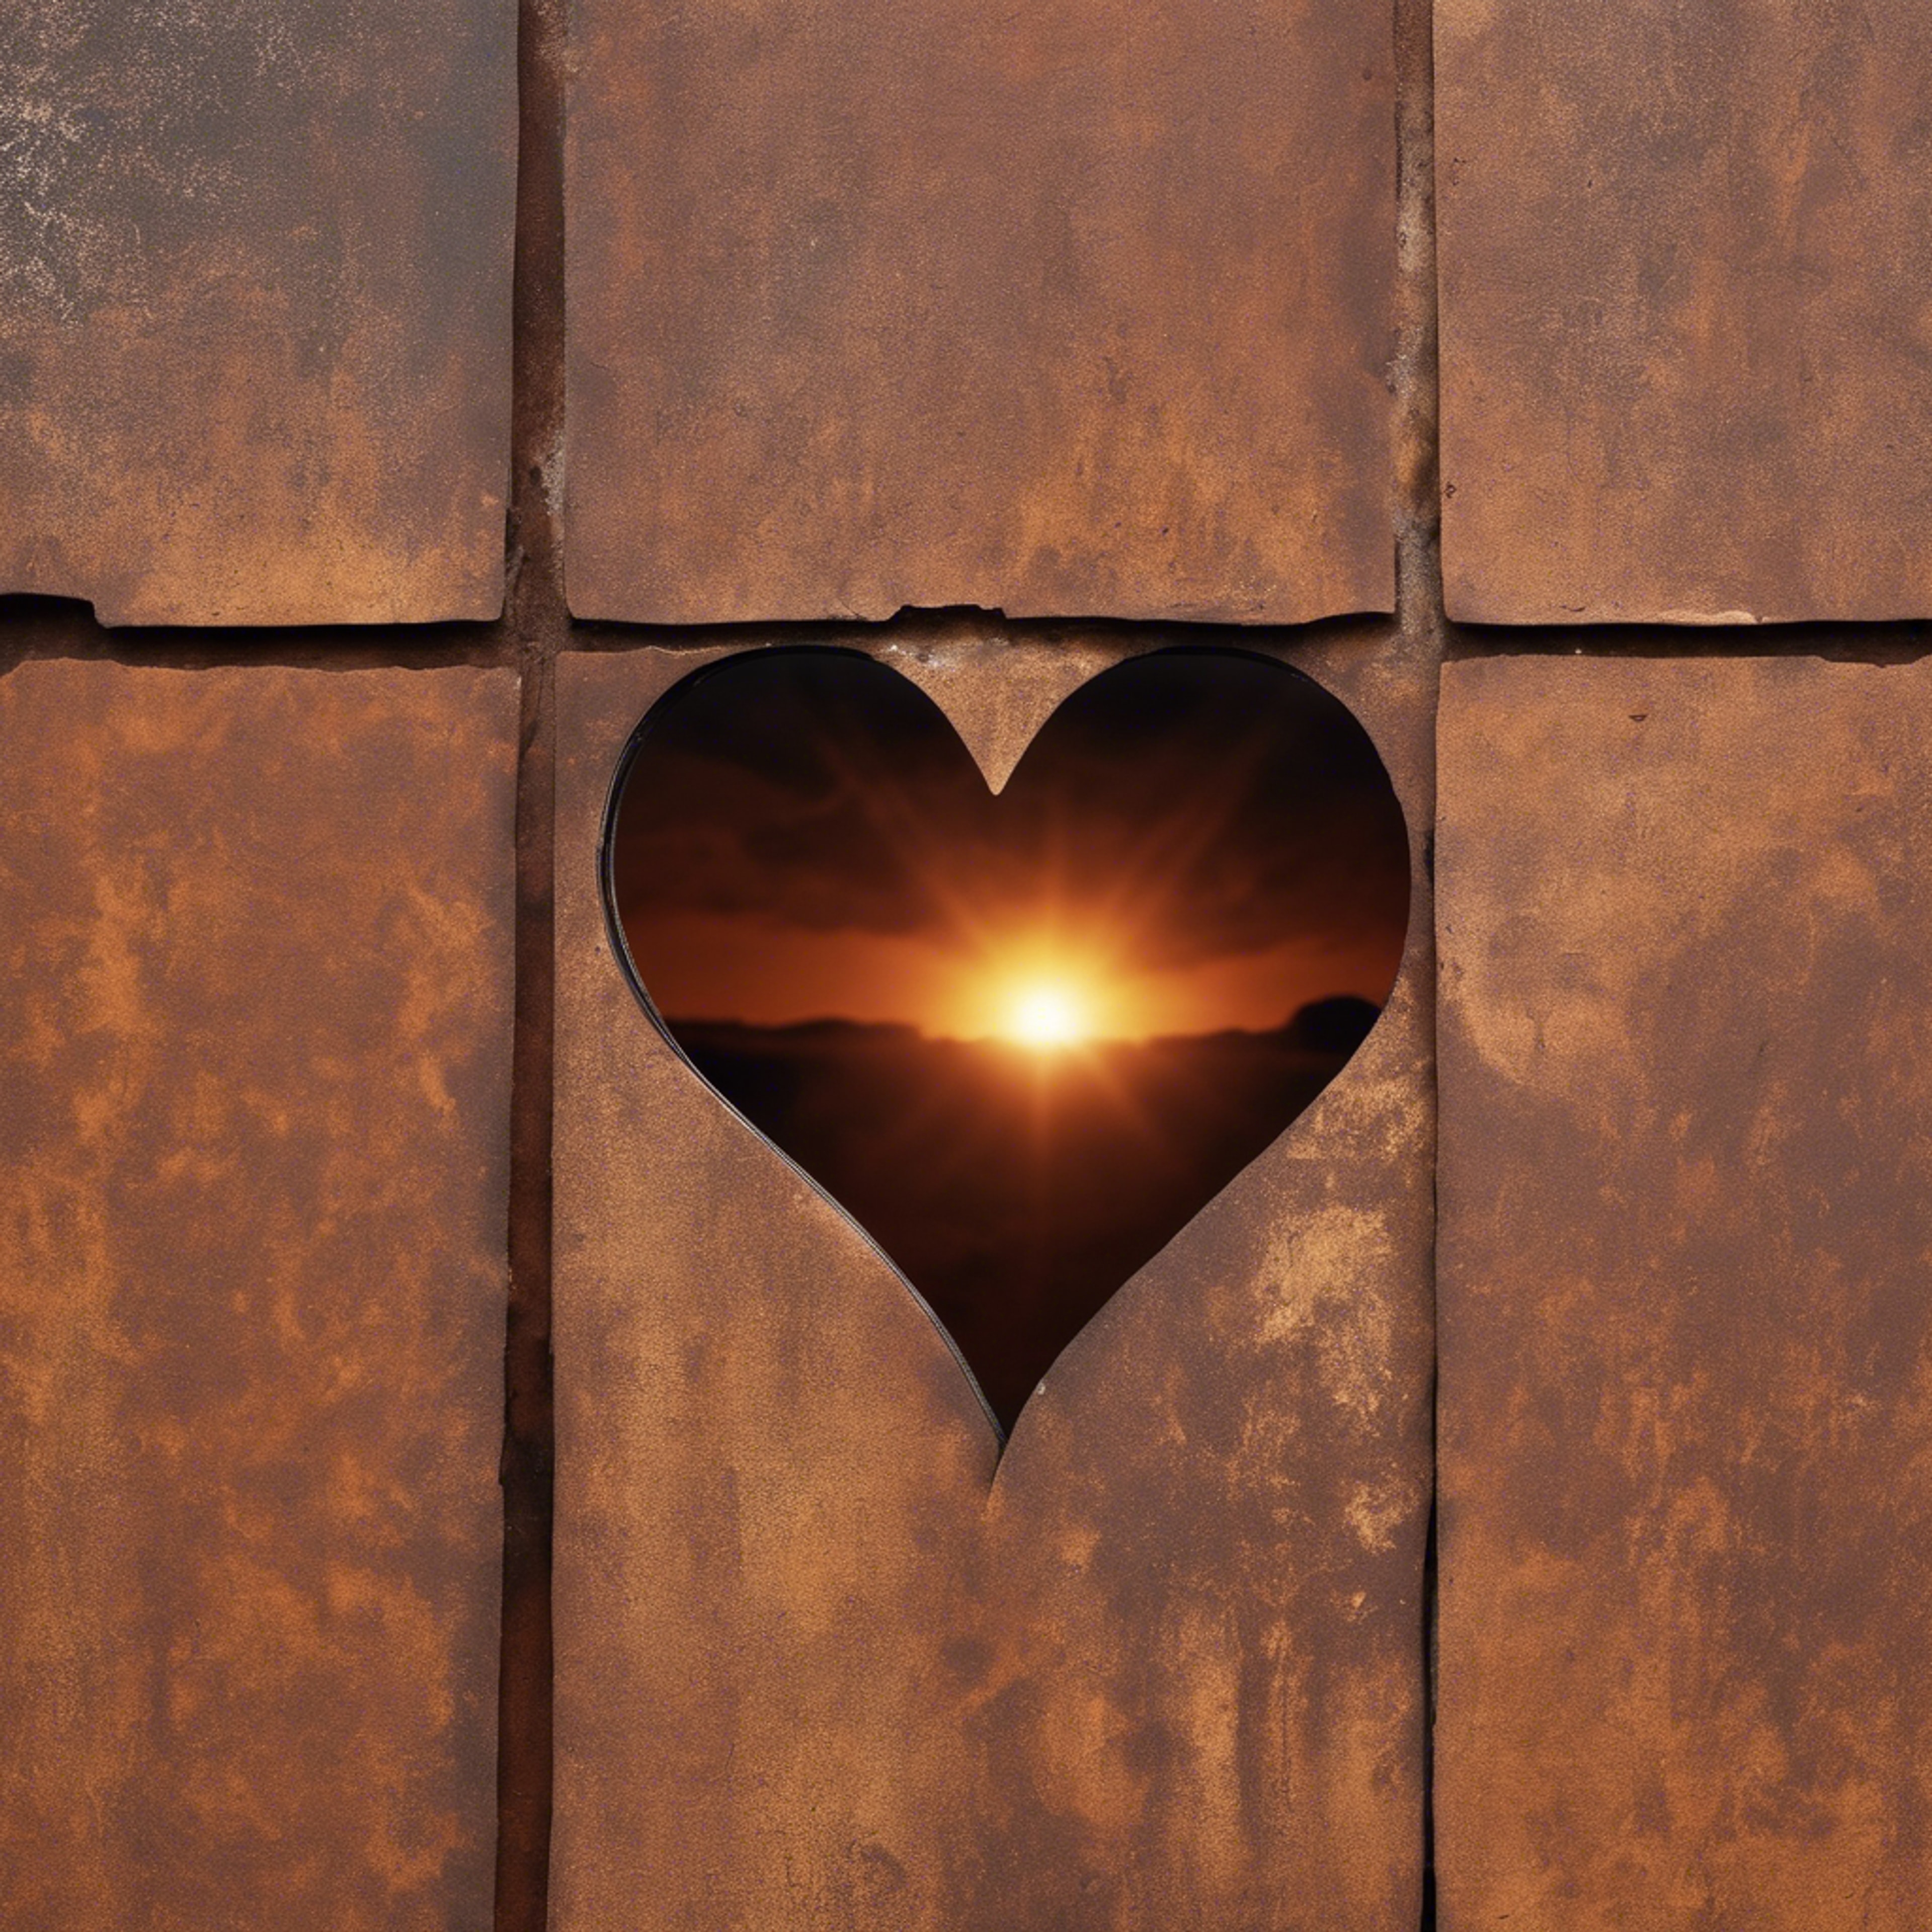 A heart silhouette on a brown, rusty metal wall, with the sun low in the sky.壁紙[2c5b0dbe66224002a2a6]